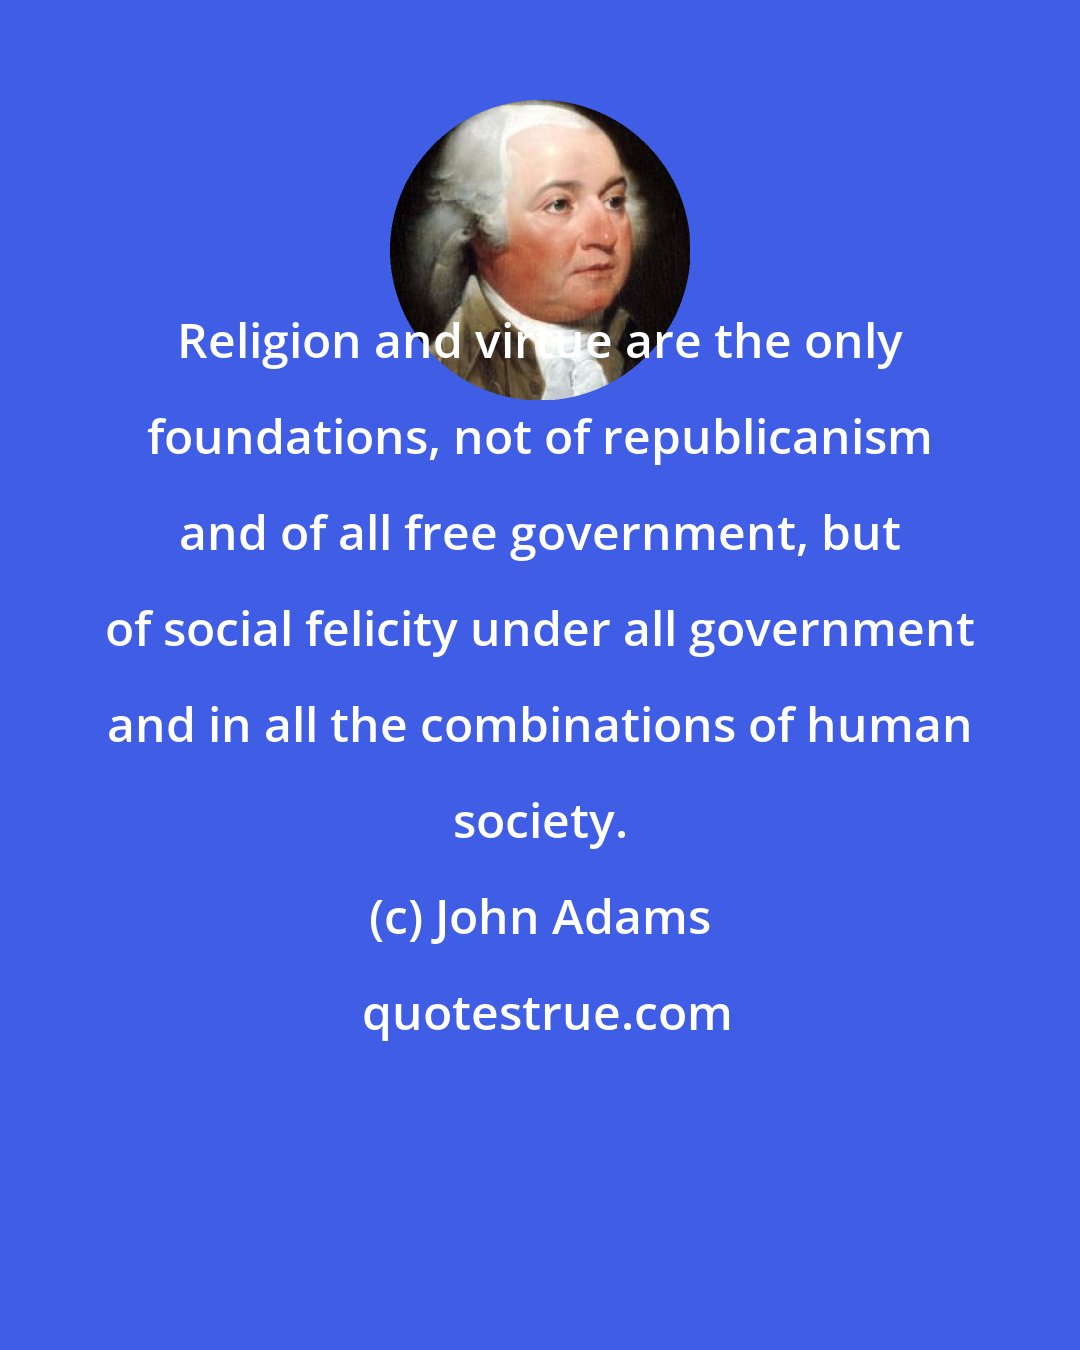 John Adams: Religion and virtue are the only foundations, not of republicanism and of all free government, but of social felicity under all government and in all the combinations of human society.